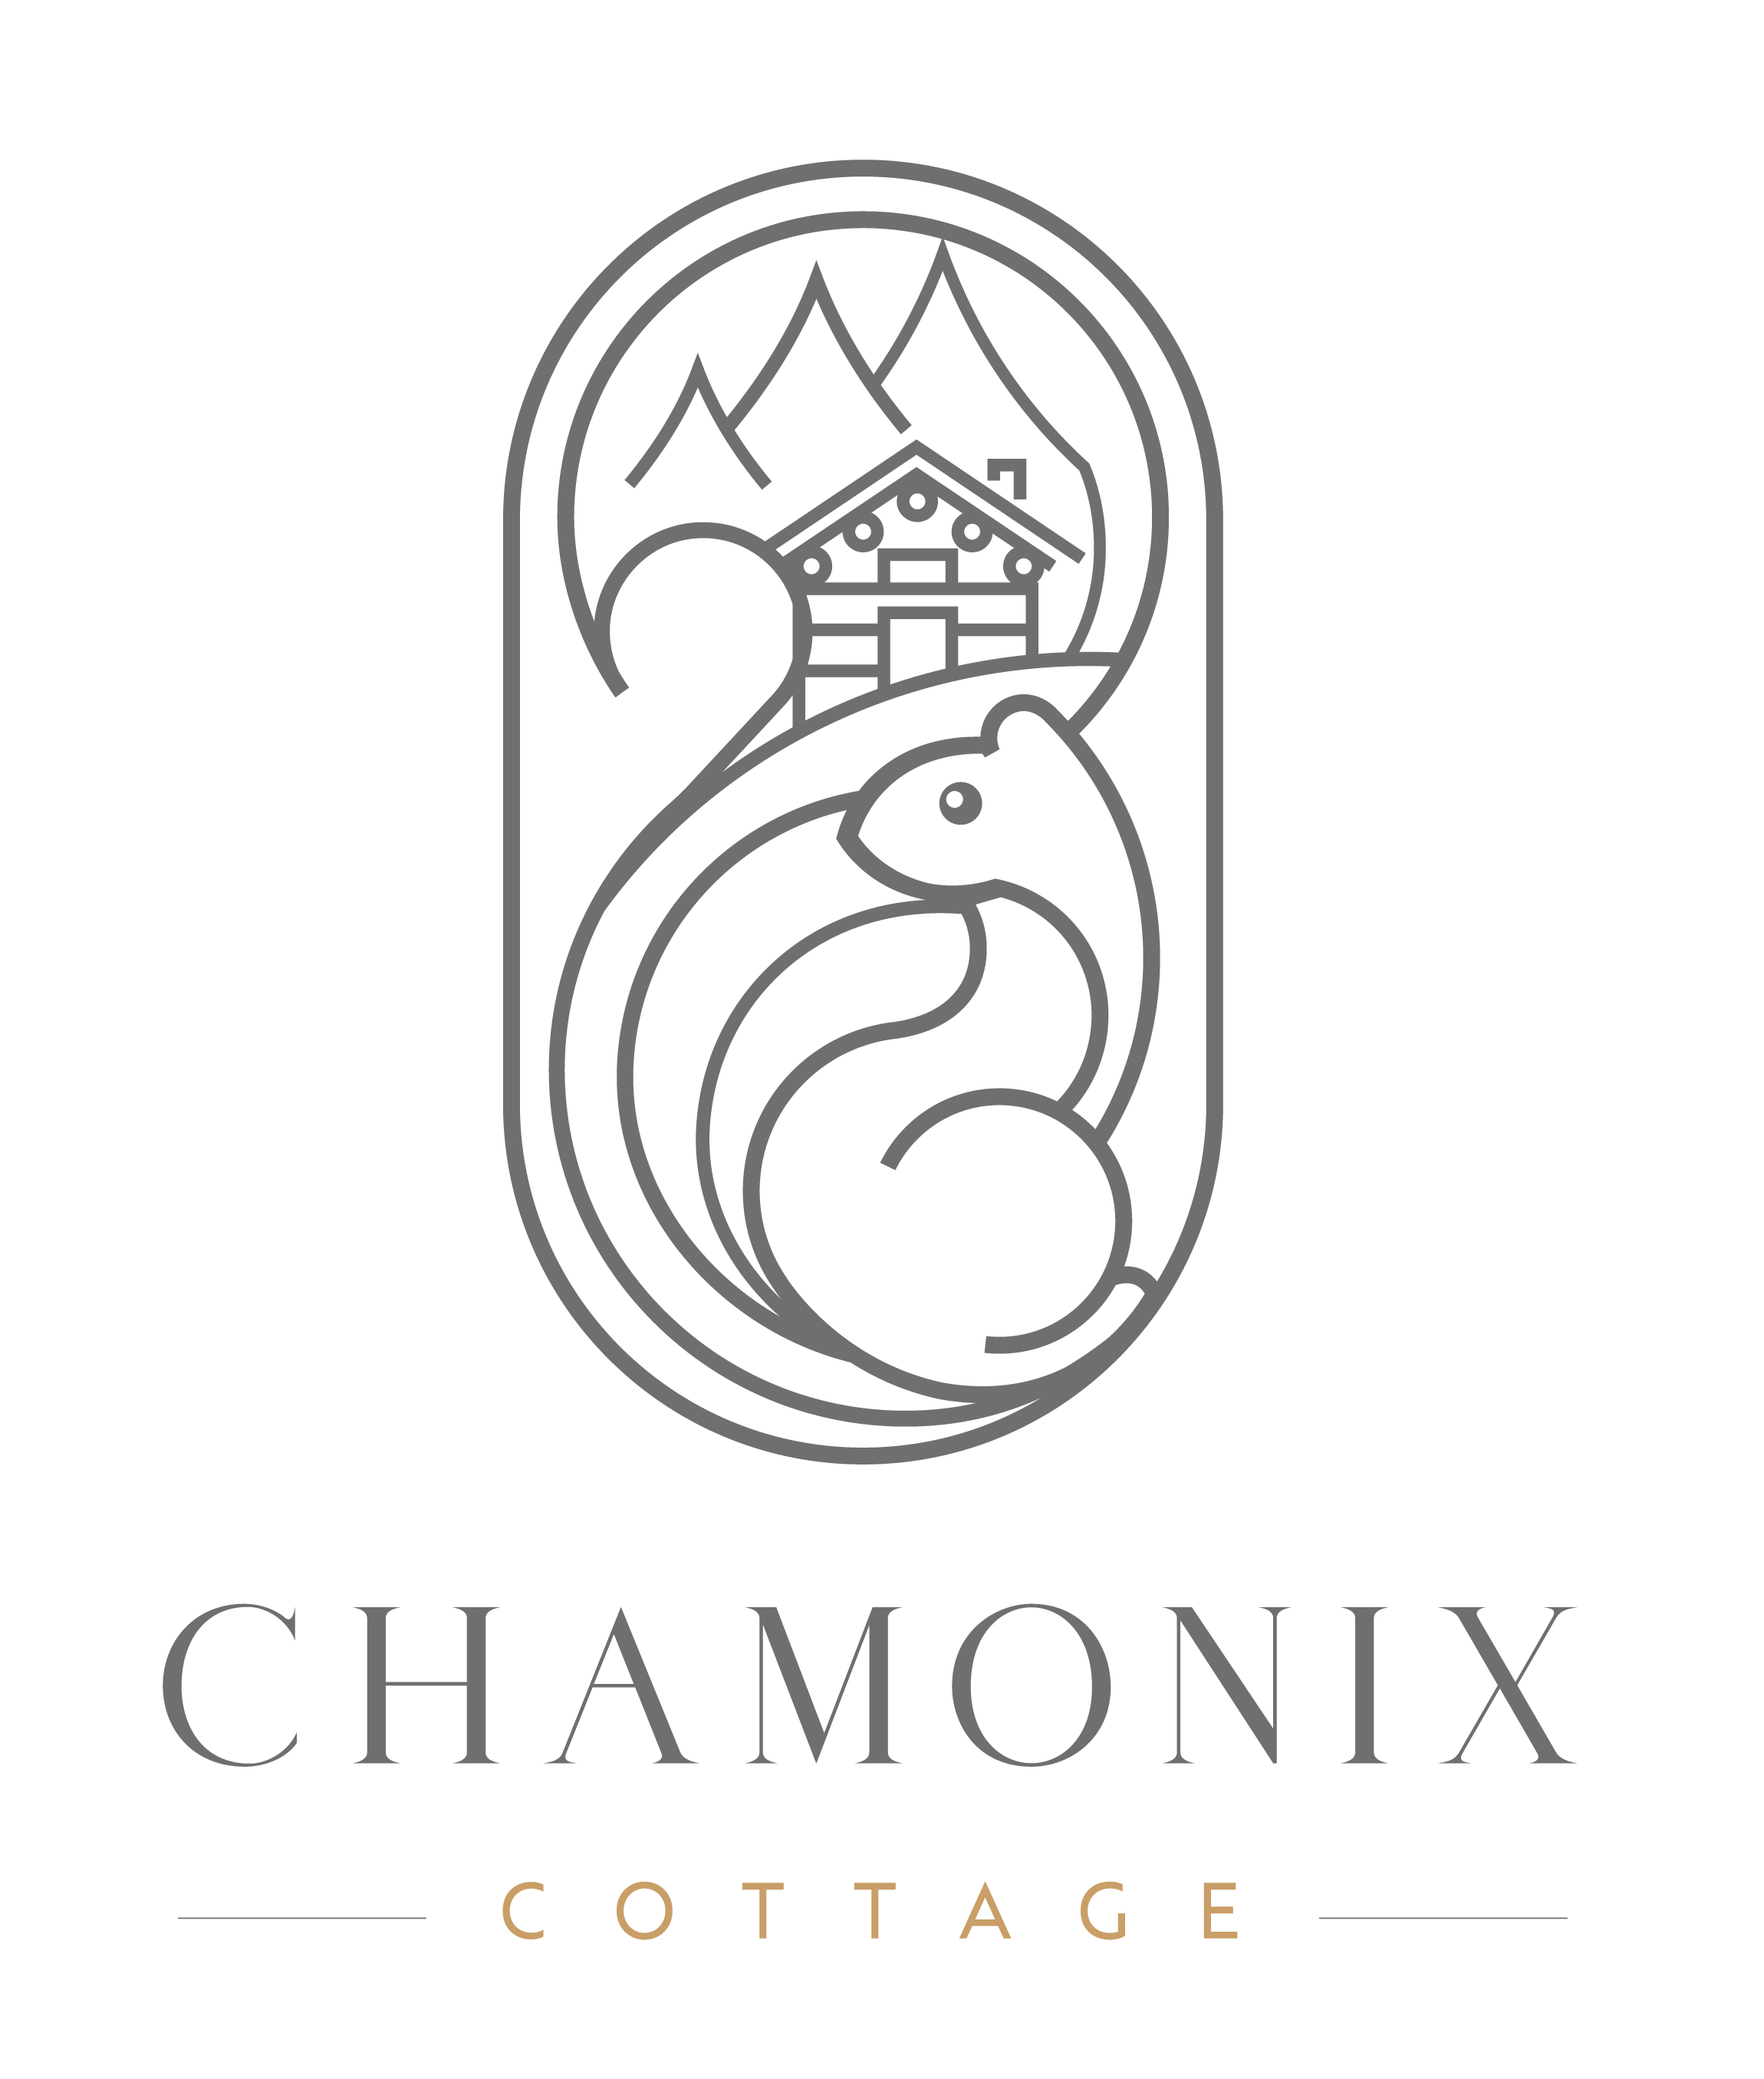 Chamonix Cottage | Services - Chamonix Cottage Discvover the services included